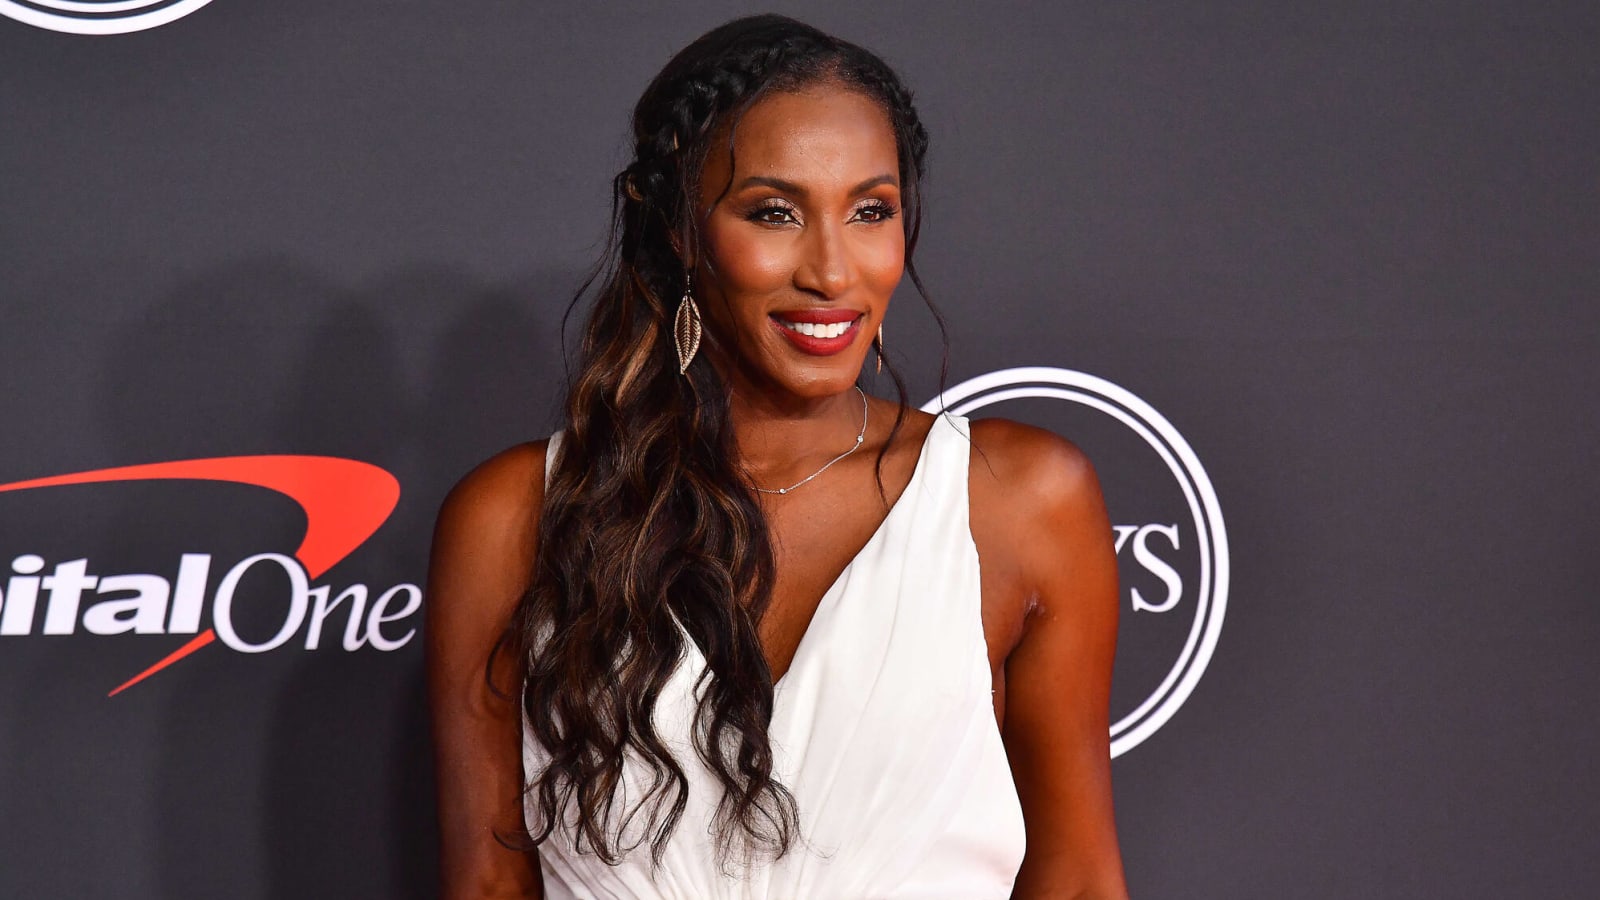 WNBA Legend Lisa Leslie Slams Former NFL Player Who Said Clippers Run L.A.: “This Is The Problem When You Set Small Goals. While You Guys Are So Focused On Dominating A City, The Lakers Are Dominating A League!"